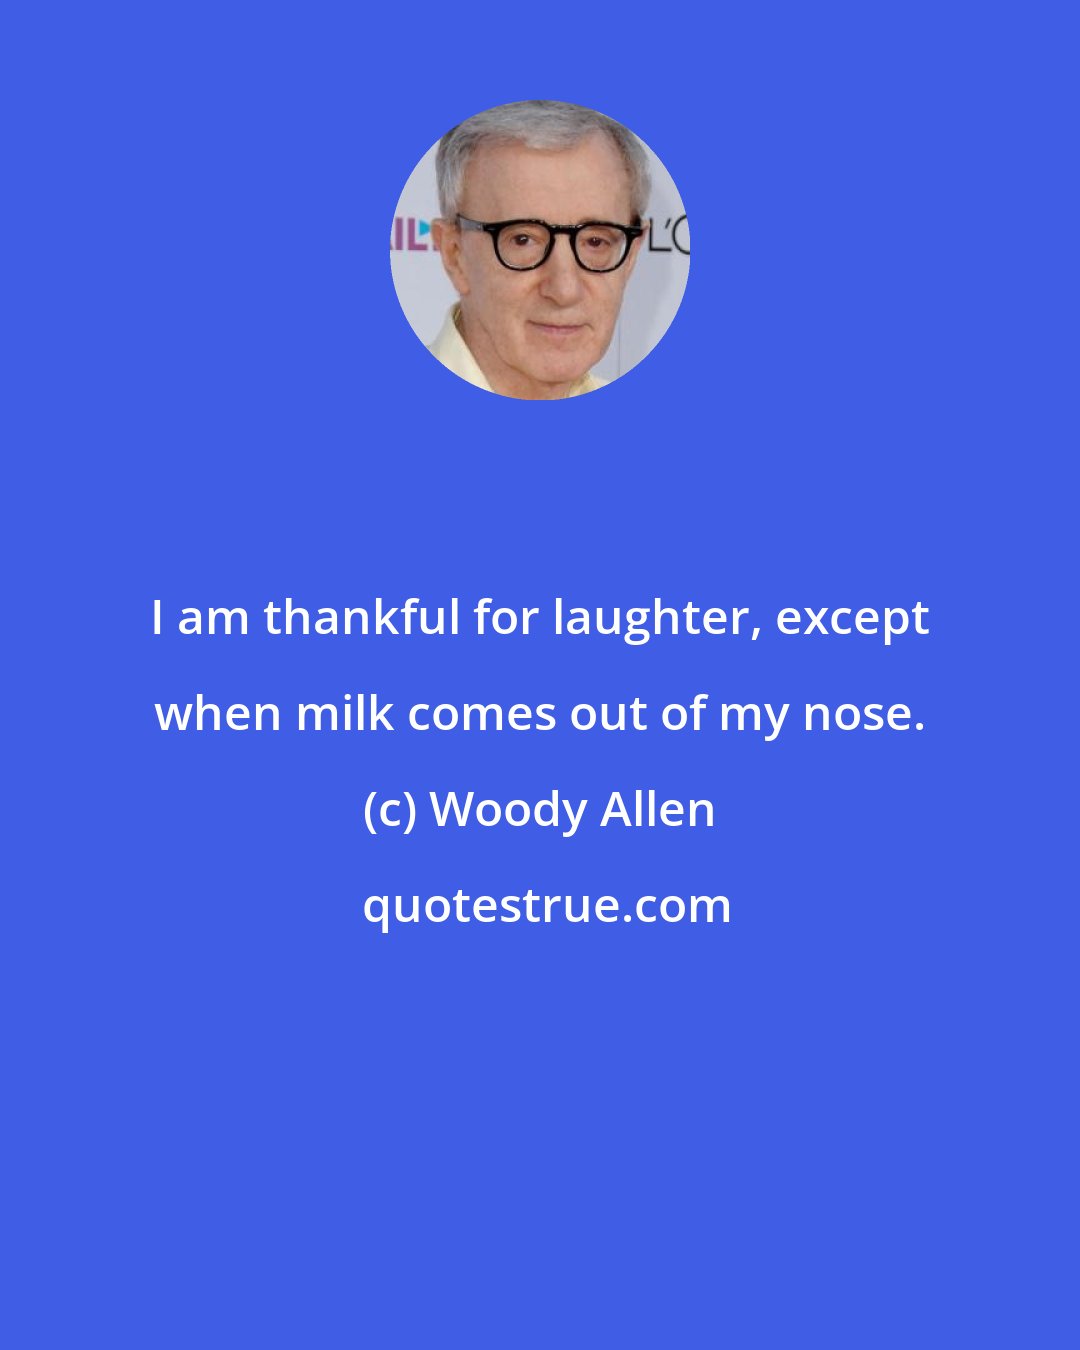 Woody Allen: I am thankful for laughter, except when milk comes out of my nose.